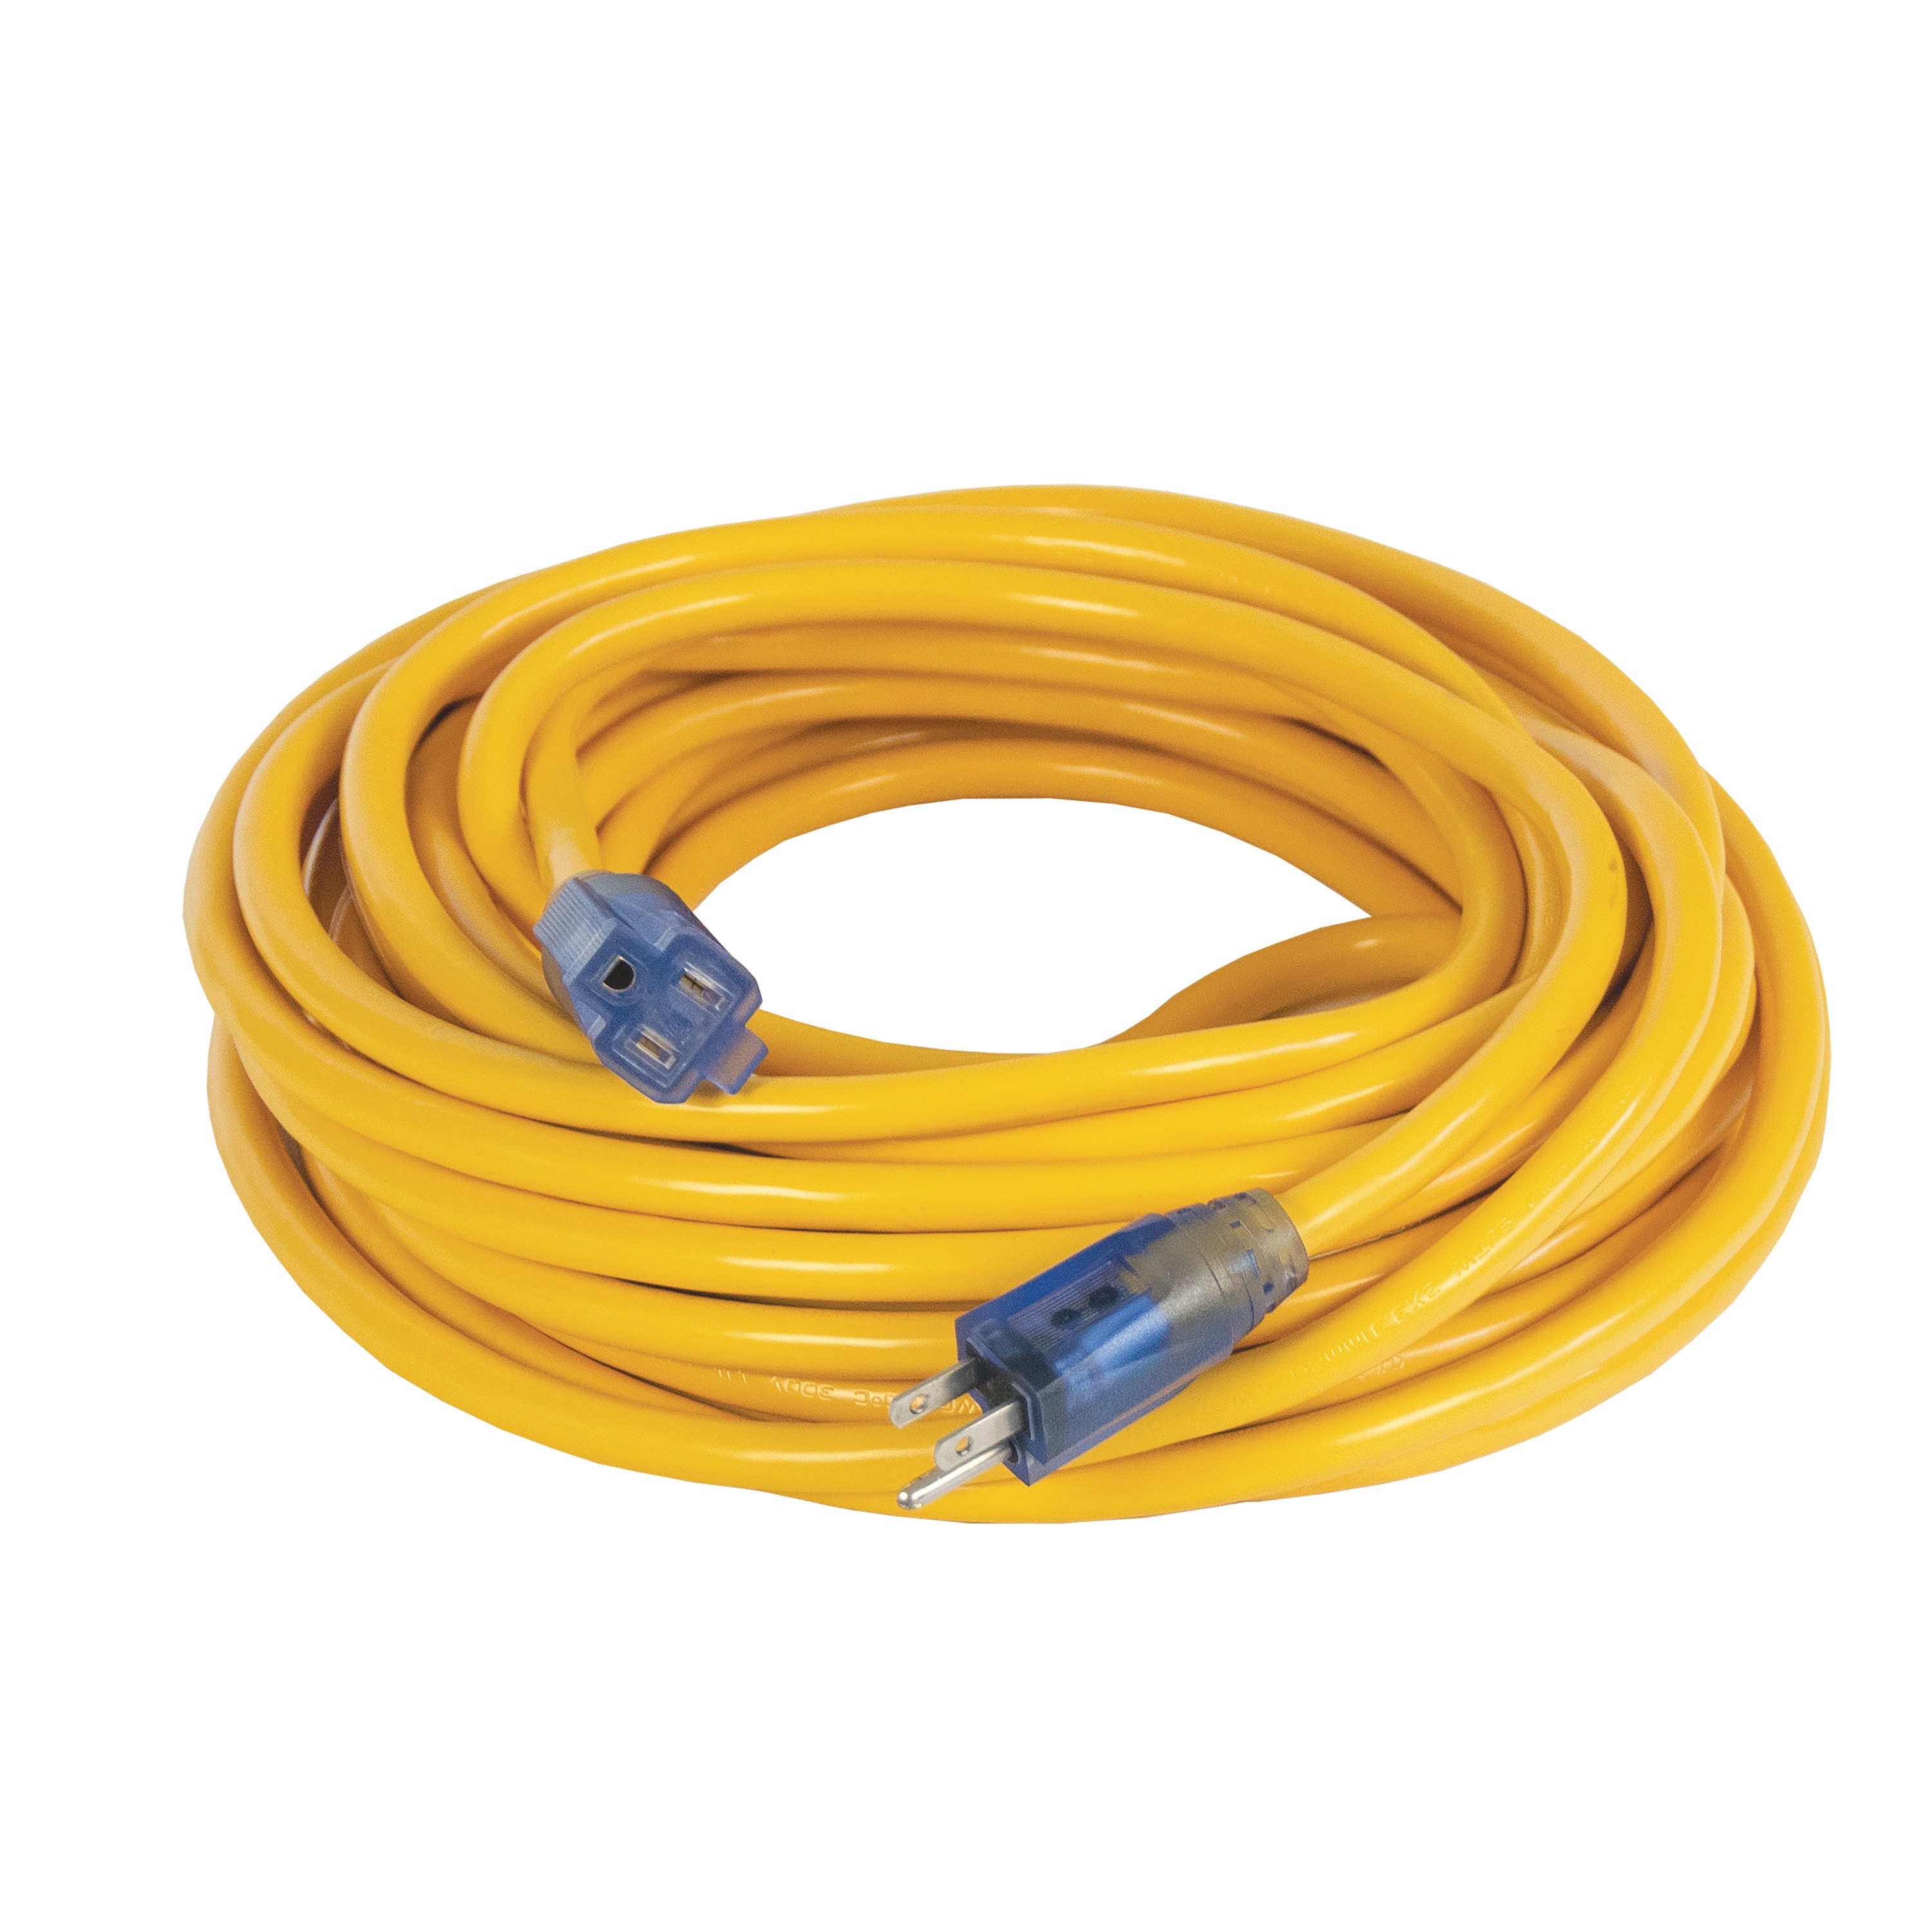 50 feet Lighted C G M Heavy Duty Extension Cord.